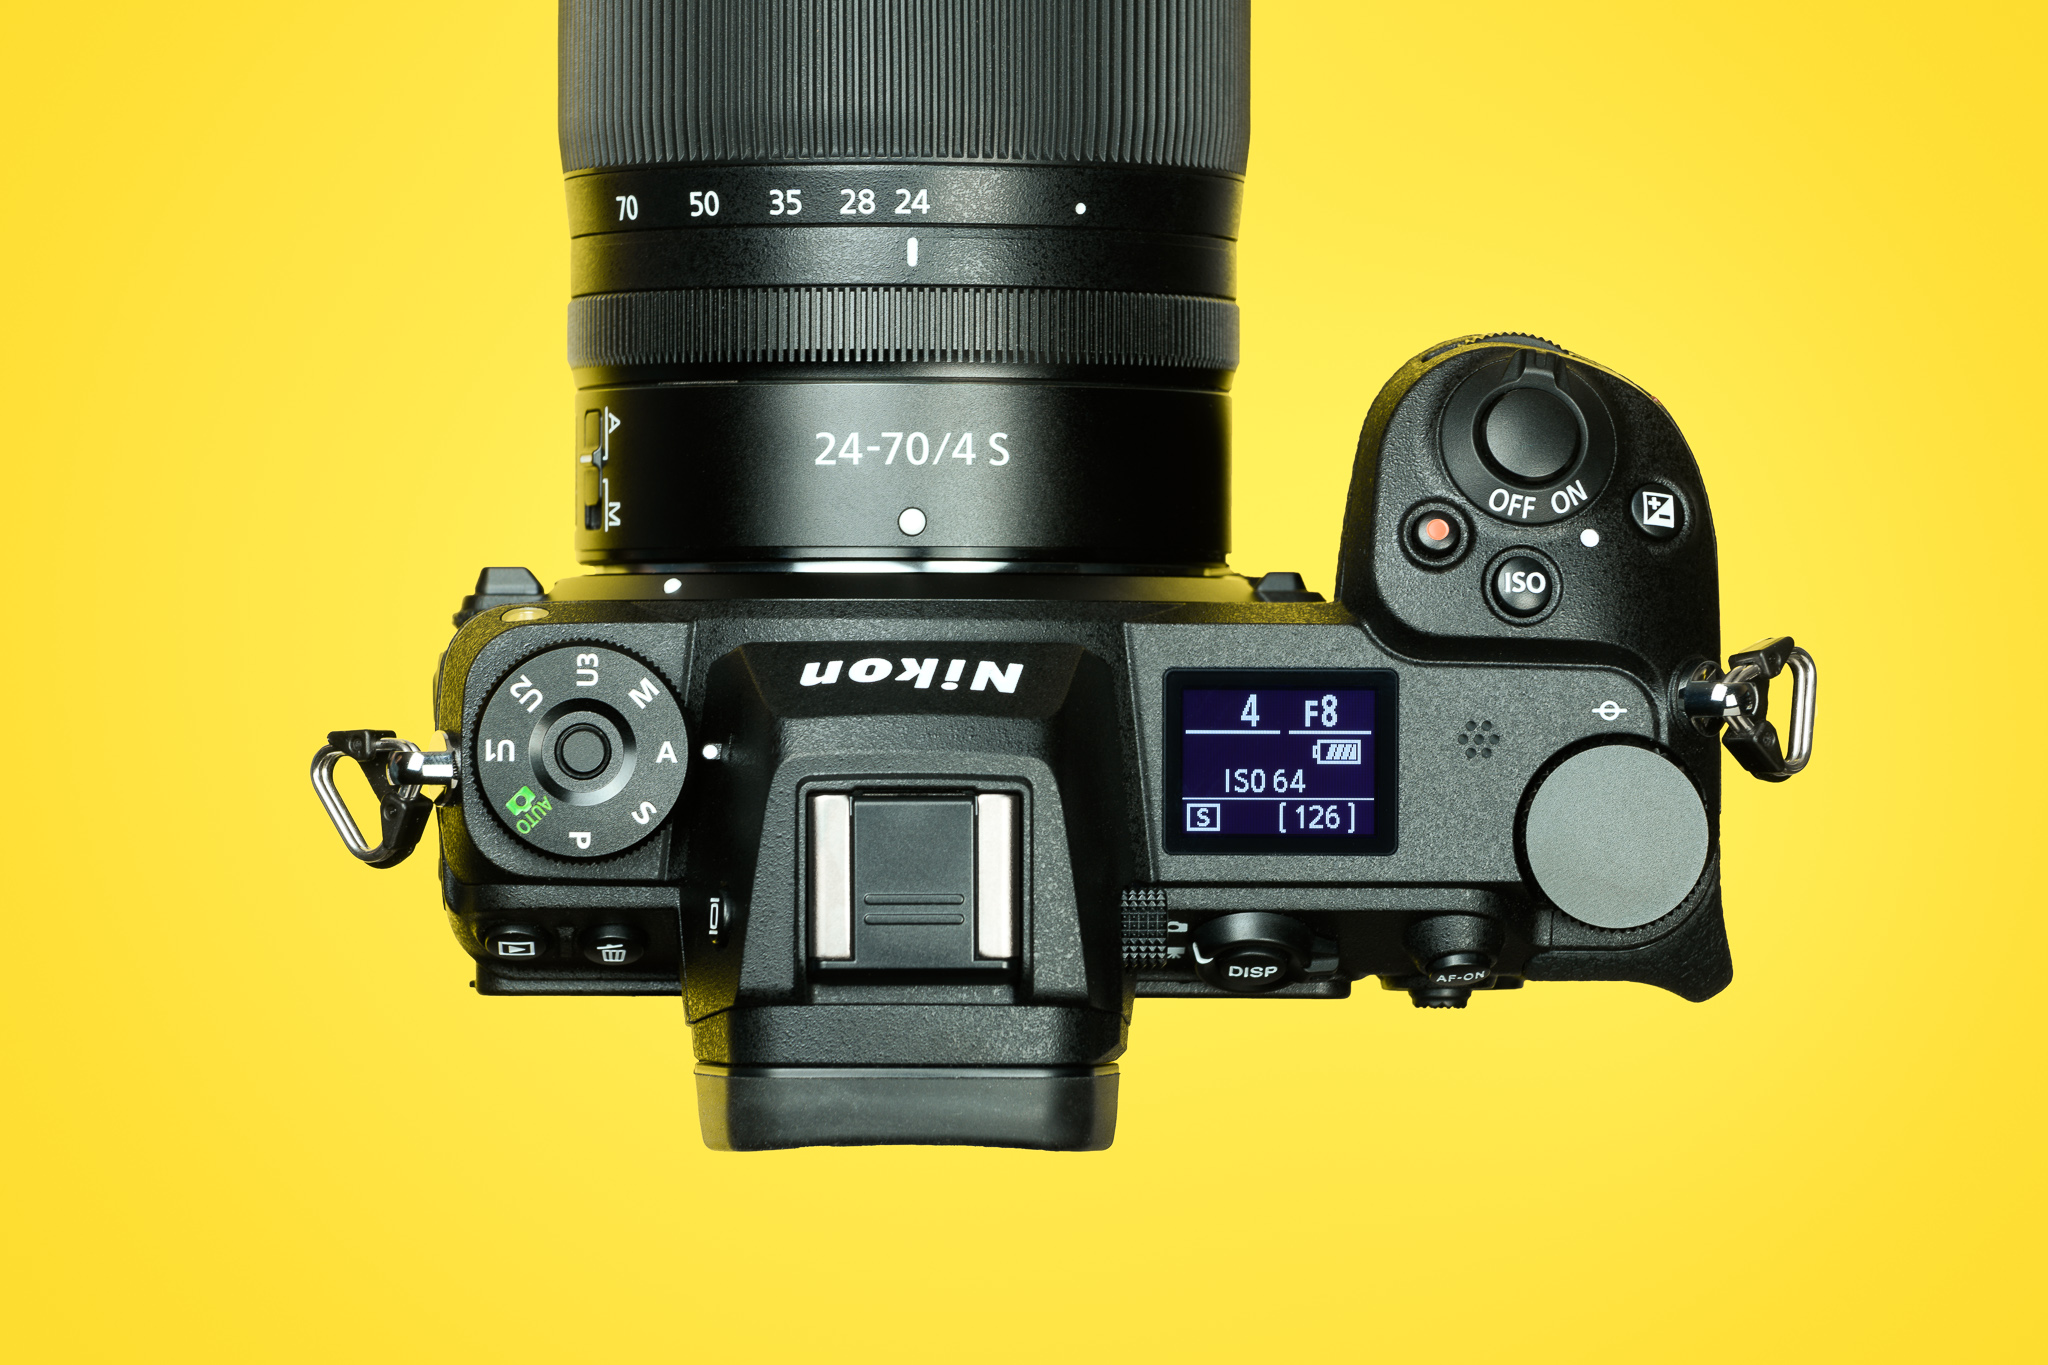 Nikon Z7 II Review - Handling and Feature Set